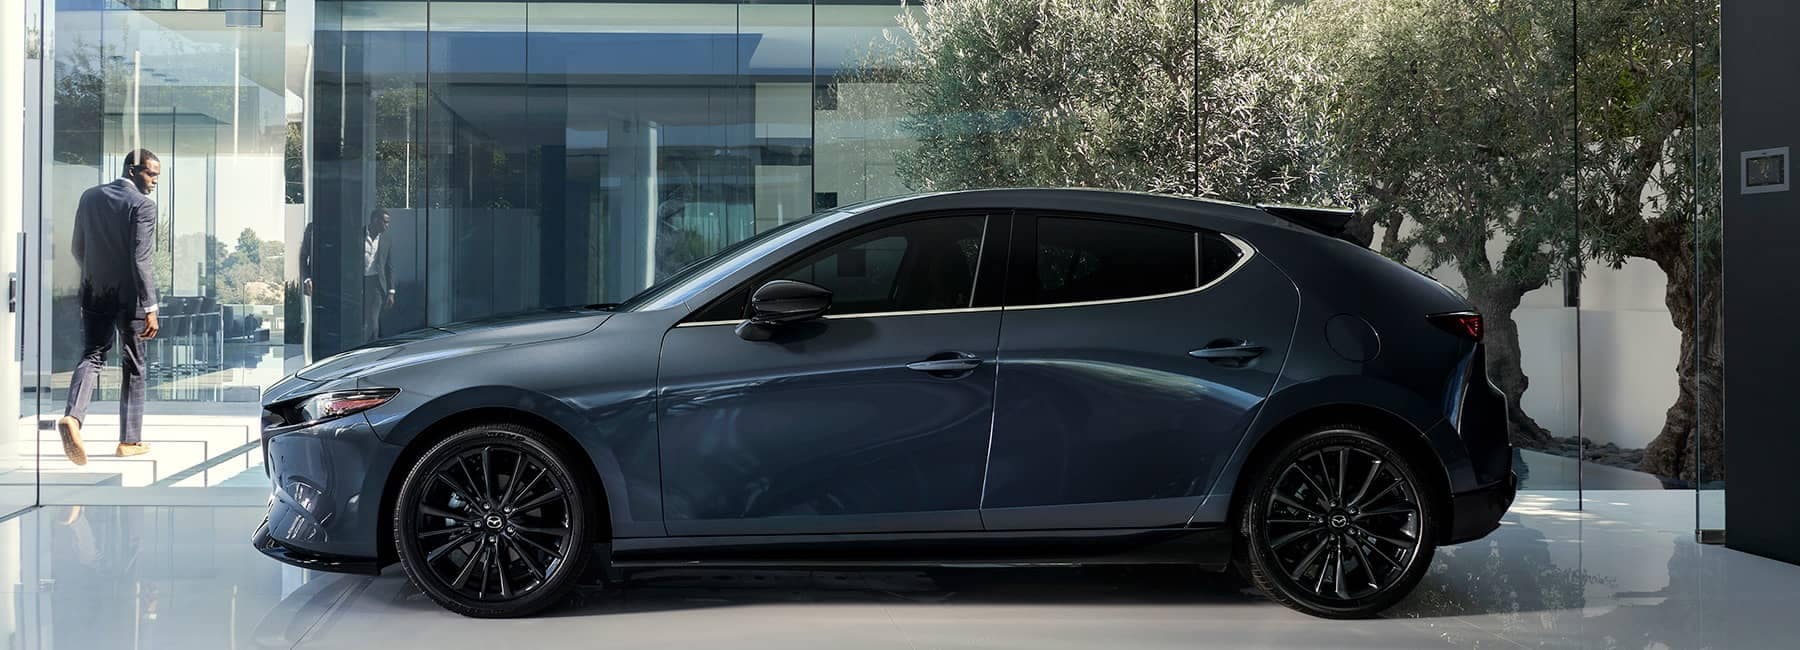 2022 Mazda 3 hatchback in front of tree and glass wall